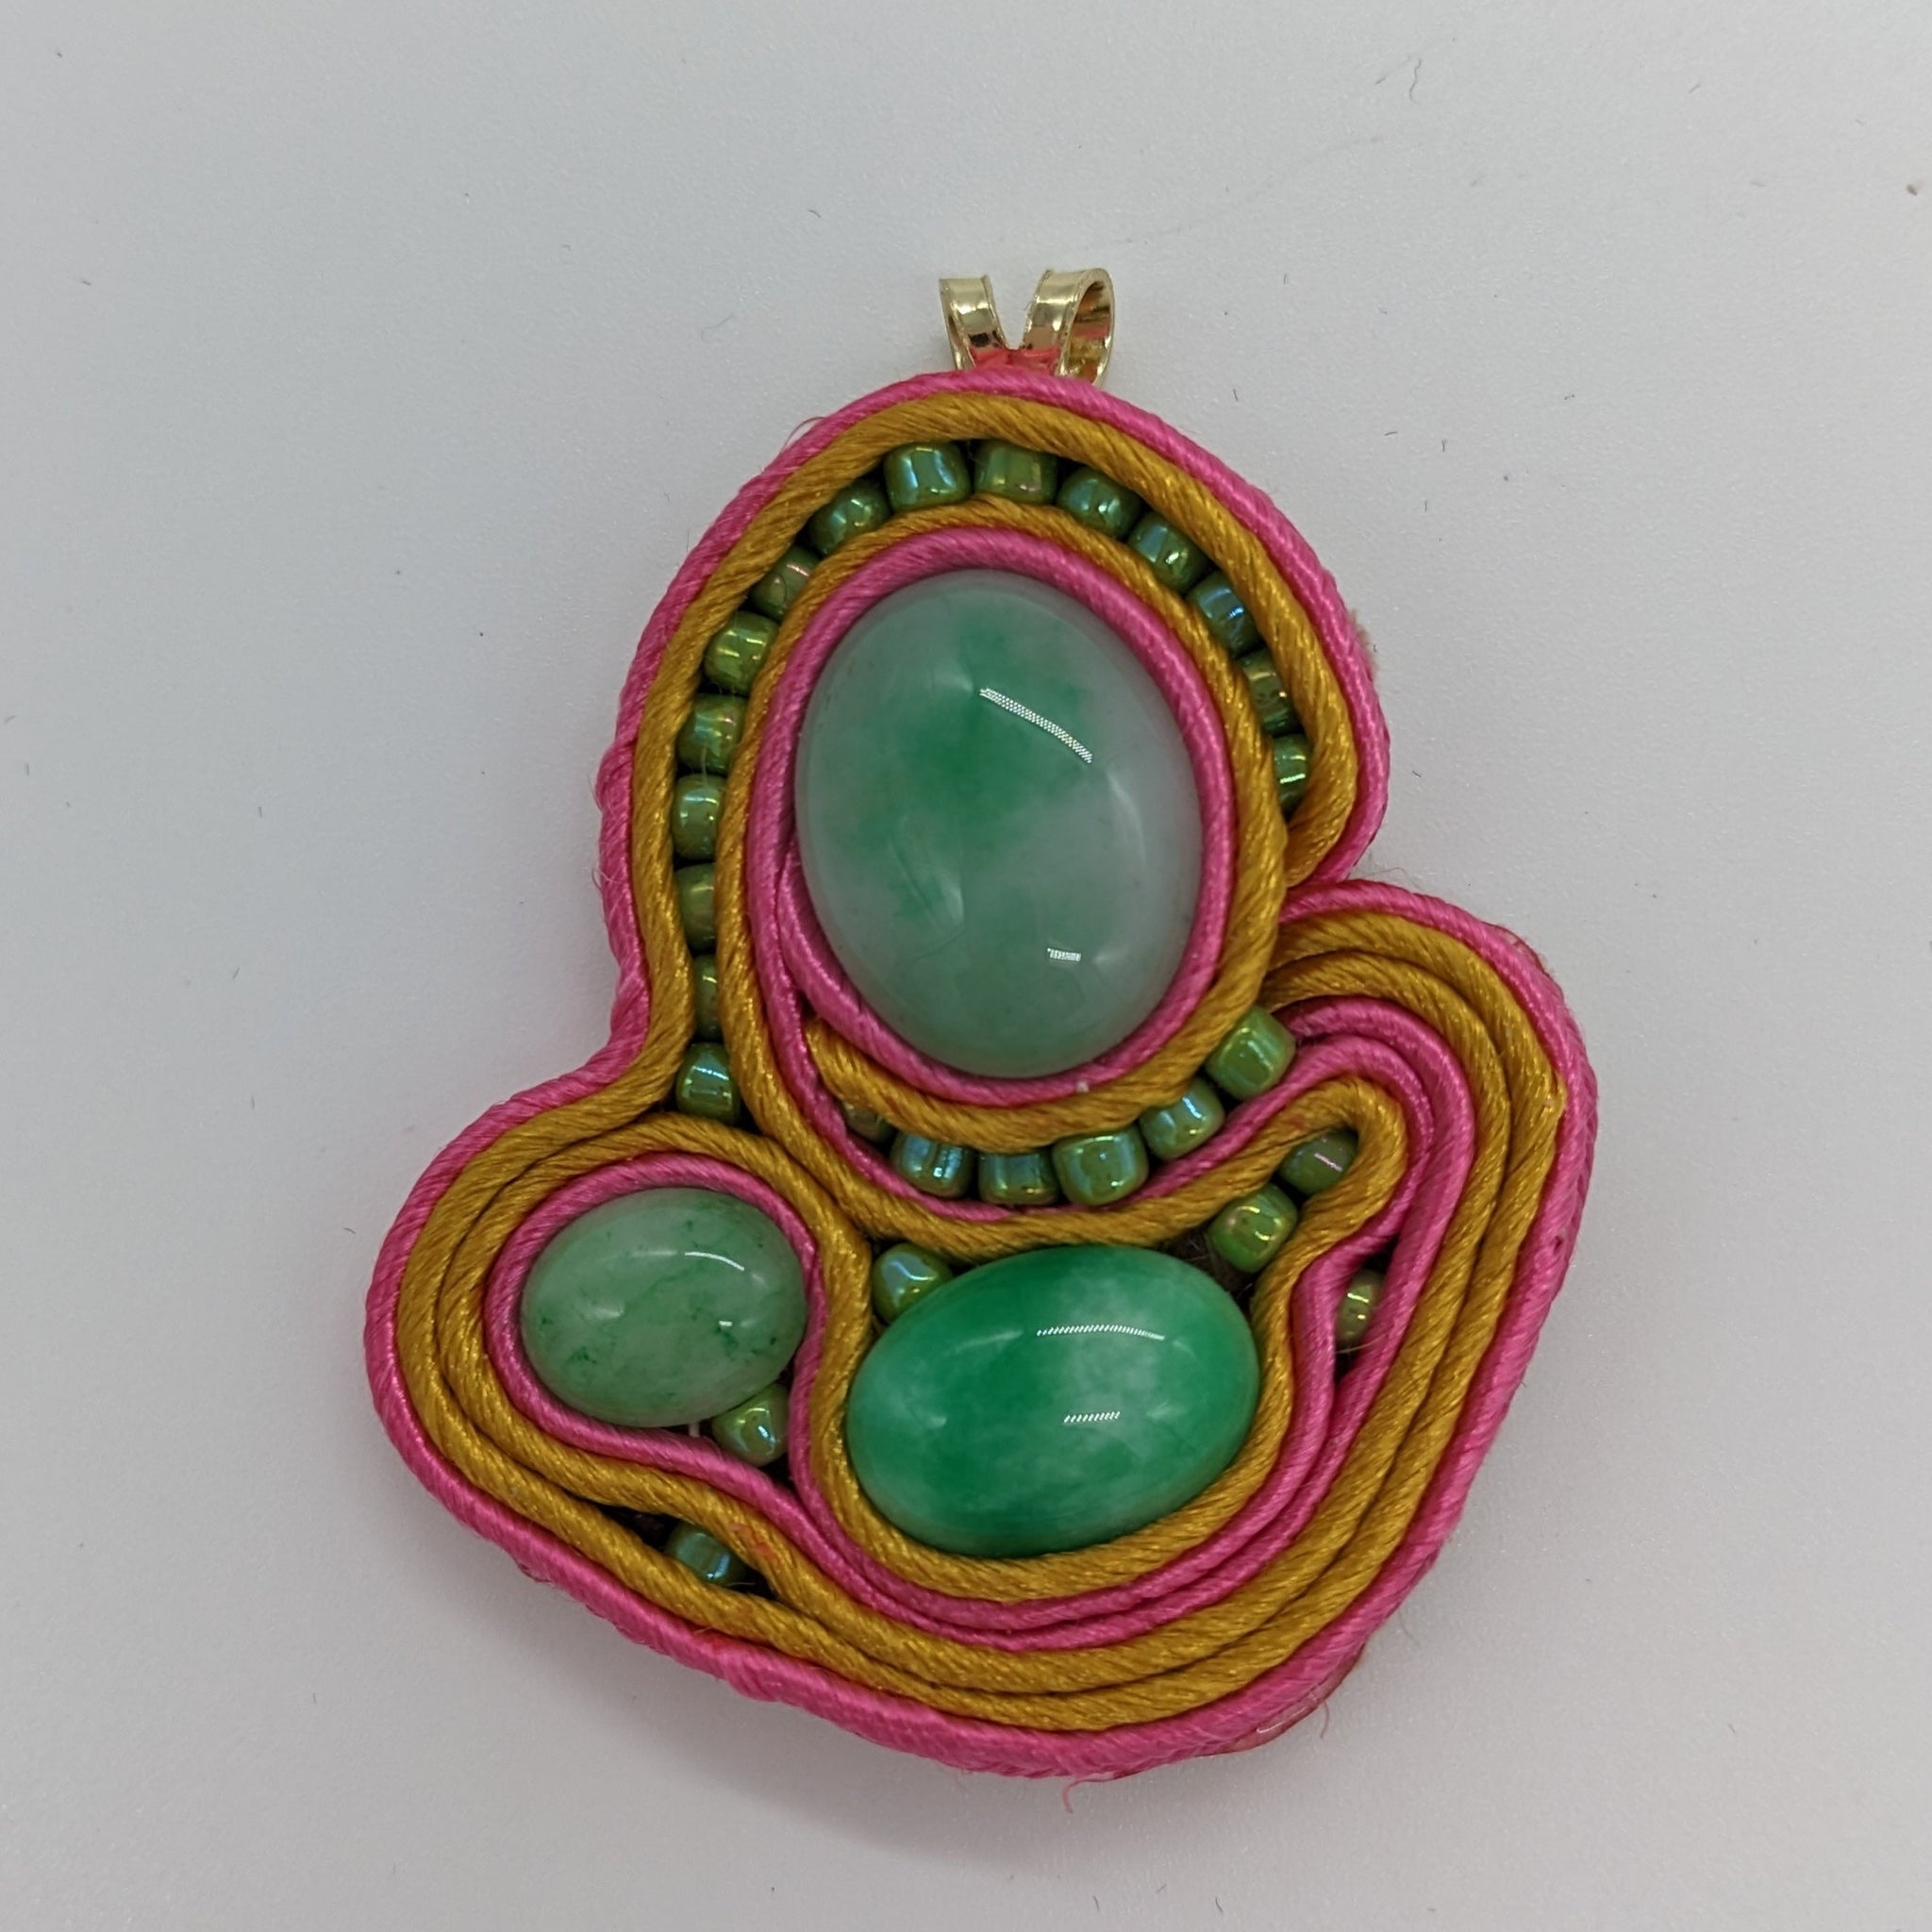 Bright Green and Pink Soutache Pendant